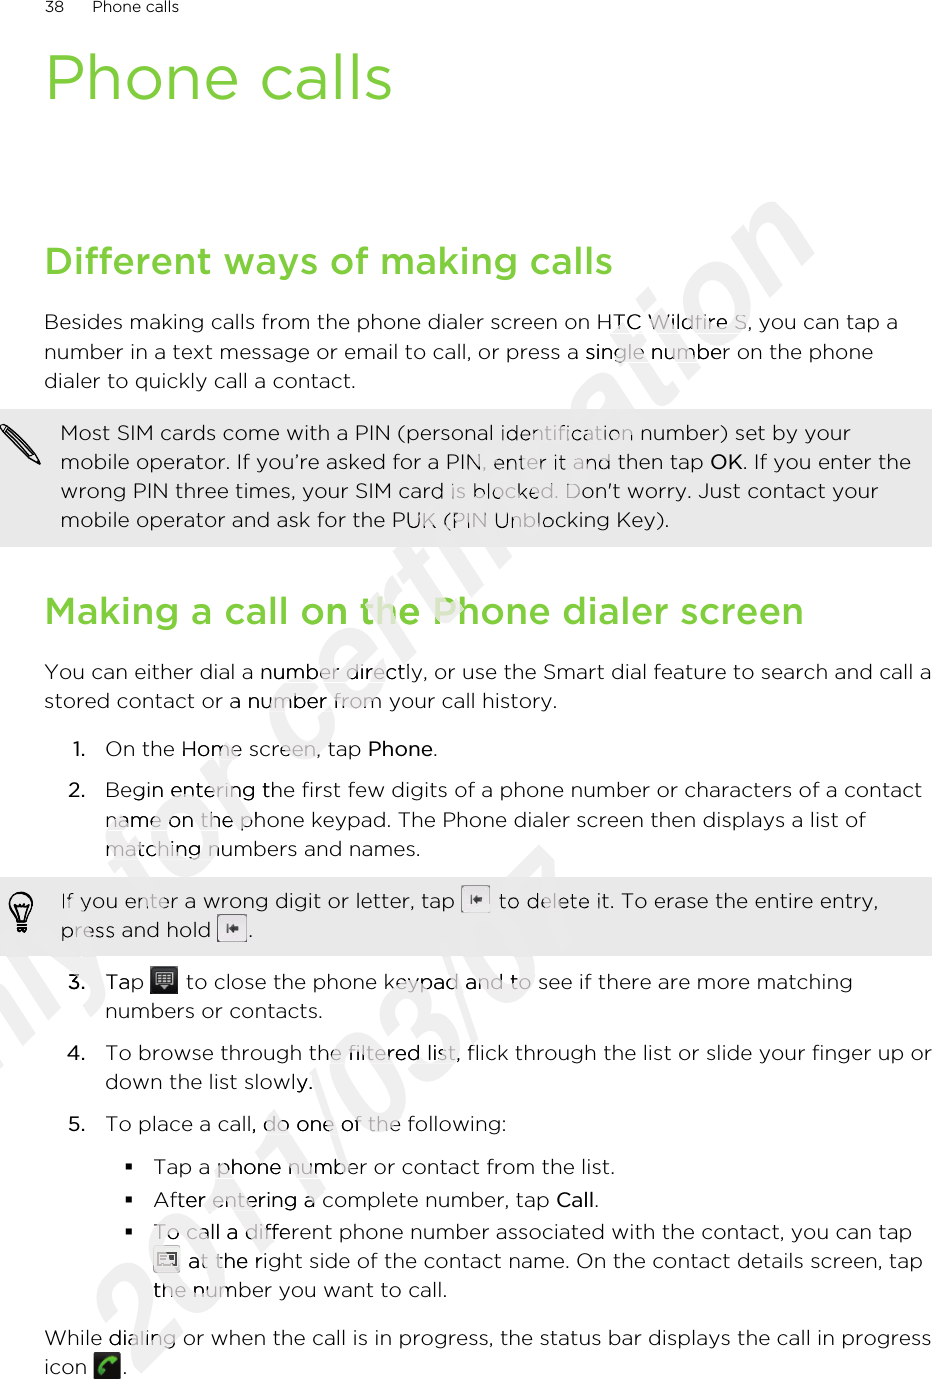 Phone callsDifferent ways of making callsBesides making calls from the phone dialer screen on HTC Wildfire S, you can tap anumber in a text message or email to call, or press a single number on the phonedialer to quickly call a contact.Most SIM cards come with a PIN (personal identification number) set by yourmobile operator. If you’re asked for a PIN, enter it and then tap OK. If you enter thewrong PIN three times, your SIM card is blocked. Don&apos;t worry. Just contact yourmobile operator and ask for the PUK (PIN Unblocking Key).Making a call on the Phone dialer screenYou can either dial a number directly, or use the Smart dial feature to search and call astored contact or a number from your call history.1. On the Home screen, tap Phone.2. Begin entering the first few digits of a phone number or characters of a contactname on the phone keypad. The Phone dialer screen then displays a list ofmatching numbers and names.If you enter a wrong digit or letter, tap   to delete it. To erase the entire entry,press and hold  .3. Tap   to close the phone keypad and to see if there are more matchingnumbers or contacts.4. To browse through the filtered list, flick through the list or slide your finger up ordown the list slowly.5. To place a call, do one of the following:§Tap a phone number or contact from the list.§After entering a complete number, tap Call.§To call a different phone number associated with the contact, you can tap at the right side of the contact name. On the contact details screen, tapthe number you want to call.While dialing or when the call is in progress, the status bar displays the call in progressicon  .38 Phone callsOnly Only Only Only Only Only Only If you enter a wrong digit or letter, tap Only If you enter a wrong digit or letter, tap press and hold Only press and hold 3.Only 3.Tap Only Tap for On the Home screen, tap for On the Home screen, tap Begin entering the first few digits of a phone number or characters of a contactfor Begin entering the first few digits of a phone number or characters of a contactname on the phone keypad. The Phone dialer screen then displays a list offor name on the phone keypad. The Phone dialer screen then displays a list ofmatching numbers and names.for matching numbers and names.for If you enter a wrong digit or letter, tap for If you enter a wrong digit or letter, tap certification Besides making calls from the phone dialer screen on HTC Wildfire S, you can tap acertification Besides making calls from the phone dialer screen on HTC Wildfire S, you can tap anumber in a text message or email to call, or press a single number on the phonecertification number in a text message or email to call, or press a single number on the phonecertification Most SIM cards come with a PIN (personal identification number) set by yourcertification Most SIM cards come with a PIN (personal identification number) set by yourmobile operator. If you’re asked for a PIN, enter it and then tap certification mobile operator. If you’re asked for a PIN, enter it and then tap wrong PIN three times, your SIM card is blocked. Don&apos;t worry. Just contact yourcertification wrong PIN three times, your SIM card is blocked. Don&apos;t worry. Just contact yourmobile operator and ask for the PUK (PIN Unblocking Key).certification mobile operator and ask for the PUK (PIN Unblocking Key).Making a call on the Phone dialer screencertification Making a call on the Phone dialer screenYou can either dial a number directly, or use the Smart dial feature to search and call acertification You can either dial a number directly, or use the Smart dial feature to search and call astored contact or a number from your call history.certification stored contact or a number from your call history.On the Home screen, tap certification On the Home screen, tap 2011/03/072011/03/072011/03/072011/03/07 to delete it. To erase the entire entry,2011/03/07 to delete it. To erase the entire entry, to close the phone keypad and to see if there are more matching2011/03/07 to close the phone keypad and to see if there are more matchingTo browse through the filtered list, flick through the list or slide your finger up or2011/03/07To browse through the filtered list, flick through the list or slide your finger up ordown the list slowly.2011/03/07down the list slowly.To place a call, do one of the following:2011/03/07To place a call, do one of the following:Tap a phone number or contact from the list.2011/03/07Tap a phone number or contact from the list.After entering a complete number, tap 2011/03/07After entering a complete number, tap To call a different phone number associated with the contact, you can tap2011/03/07To call a different phone number associated with the contact, you can tap2011/03/072011/03/07 at the right side of the contact name. On the contact details screen, tap2011/03/07 at the right side of the contact name. On the contact details screen, tapthe number you want to call.2011/03/07the number you want to call.While dialing or when the call is in progress, the status bar displays the call in progress2011/03/07While dialing or when the call is in progress, the status bar displays the call in progress2011/03/07